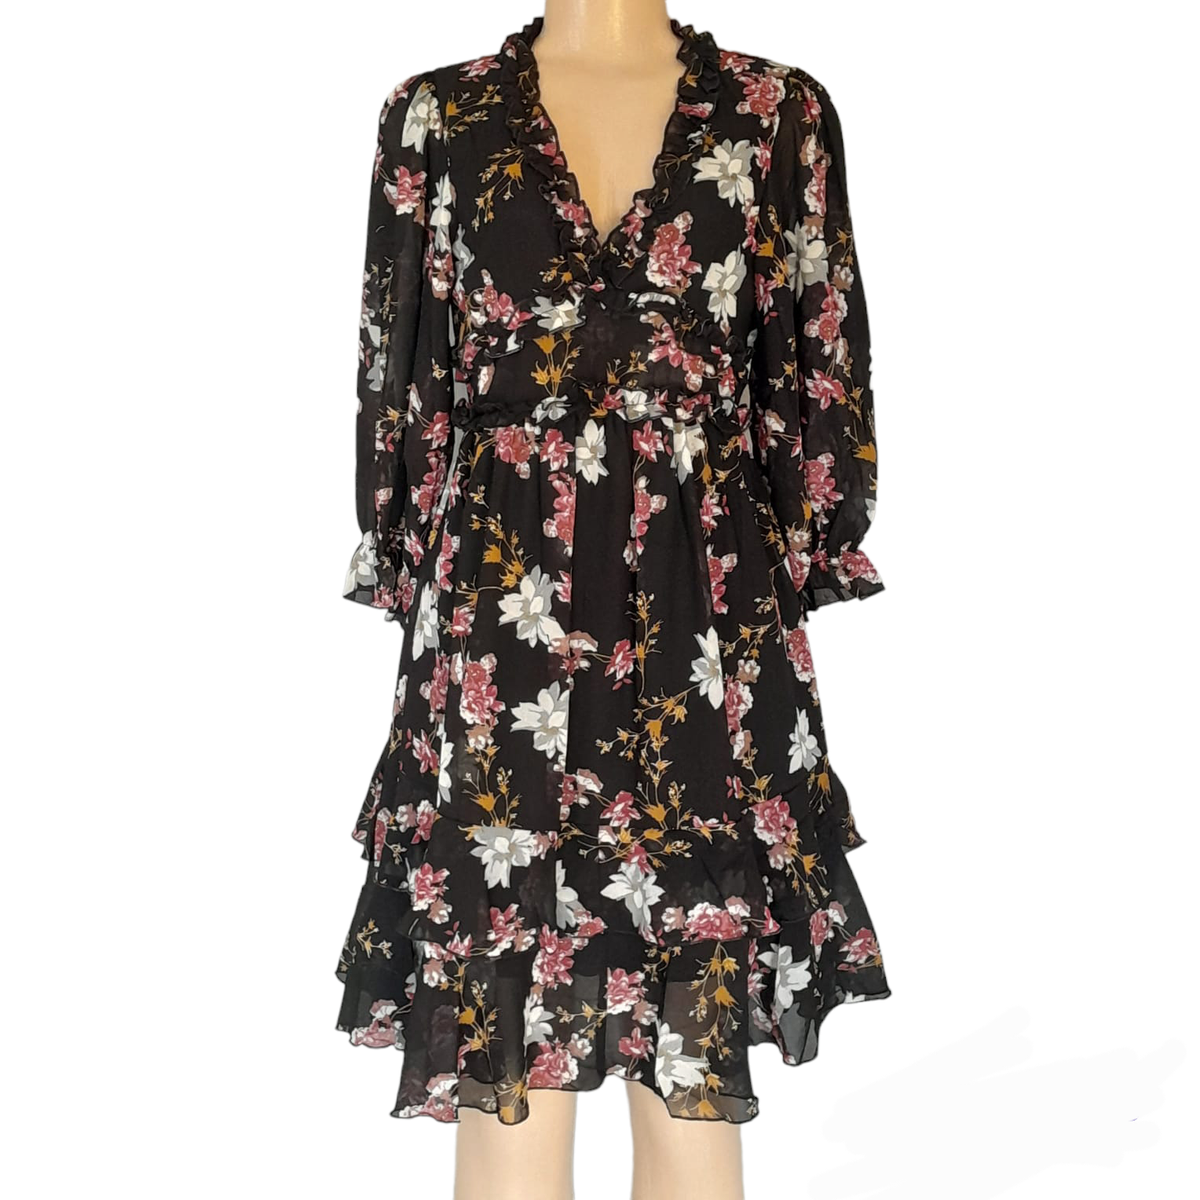 Ladies Black and Pink Floral Chiffon Dress | Shop Today. Get it ...